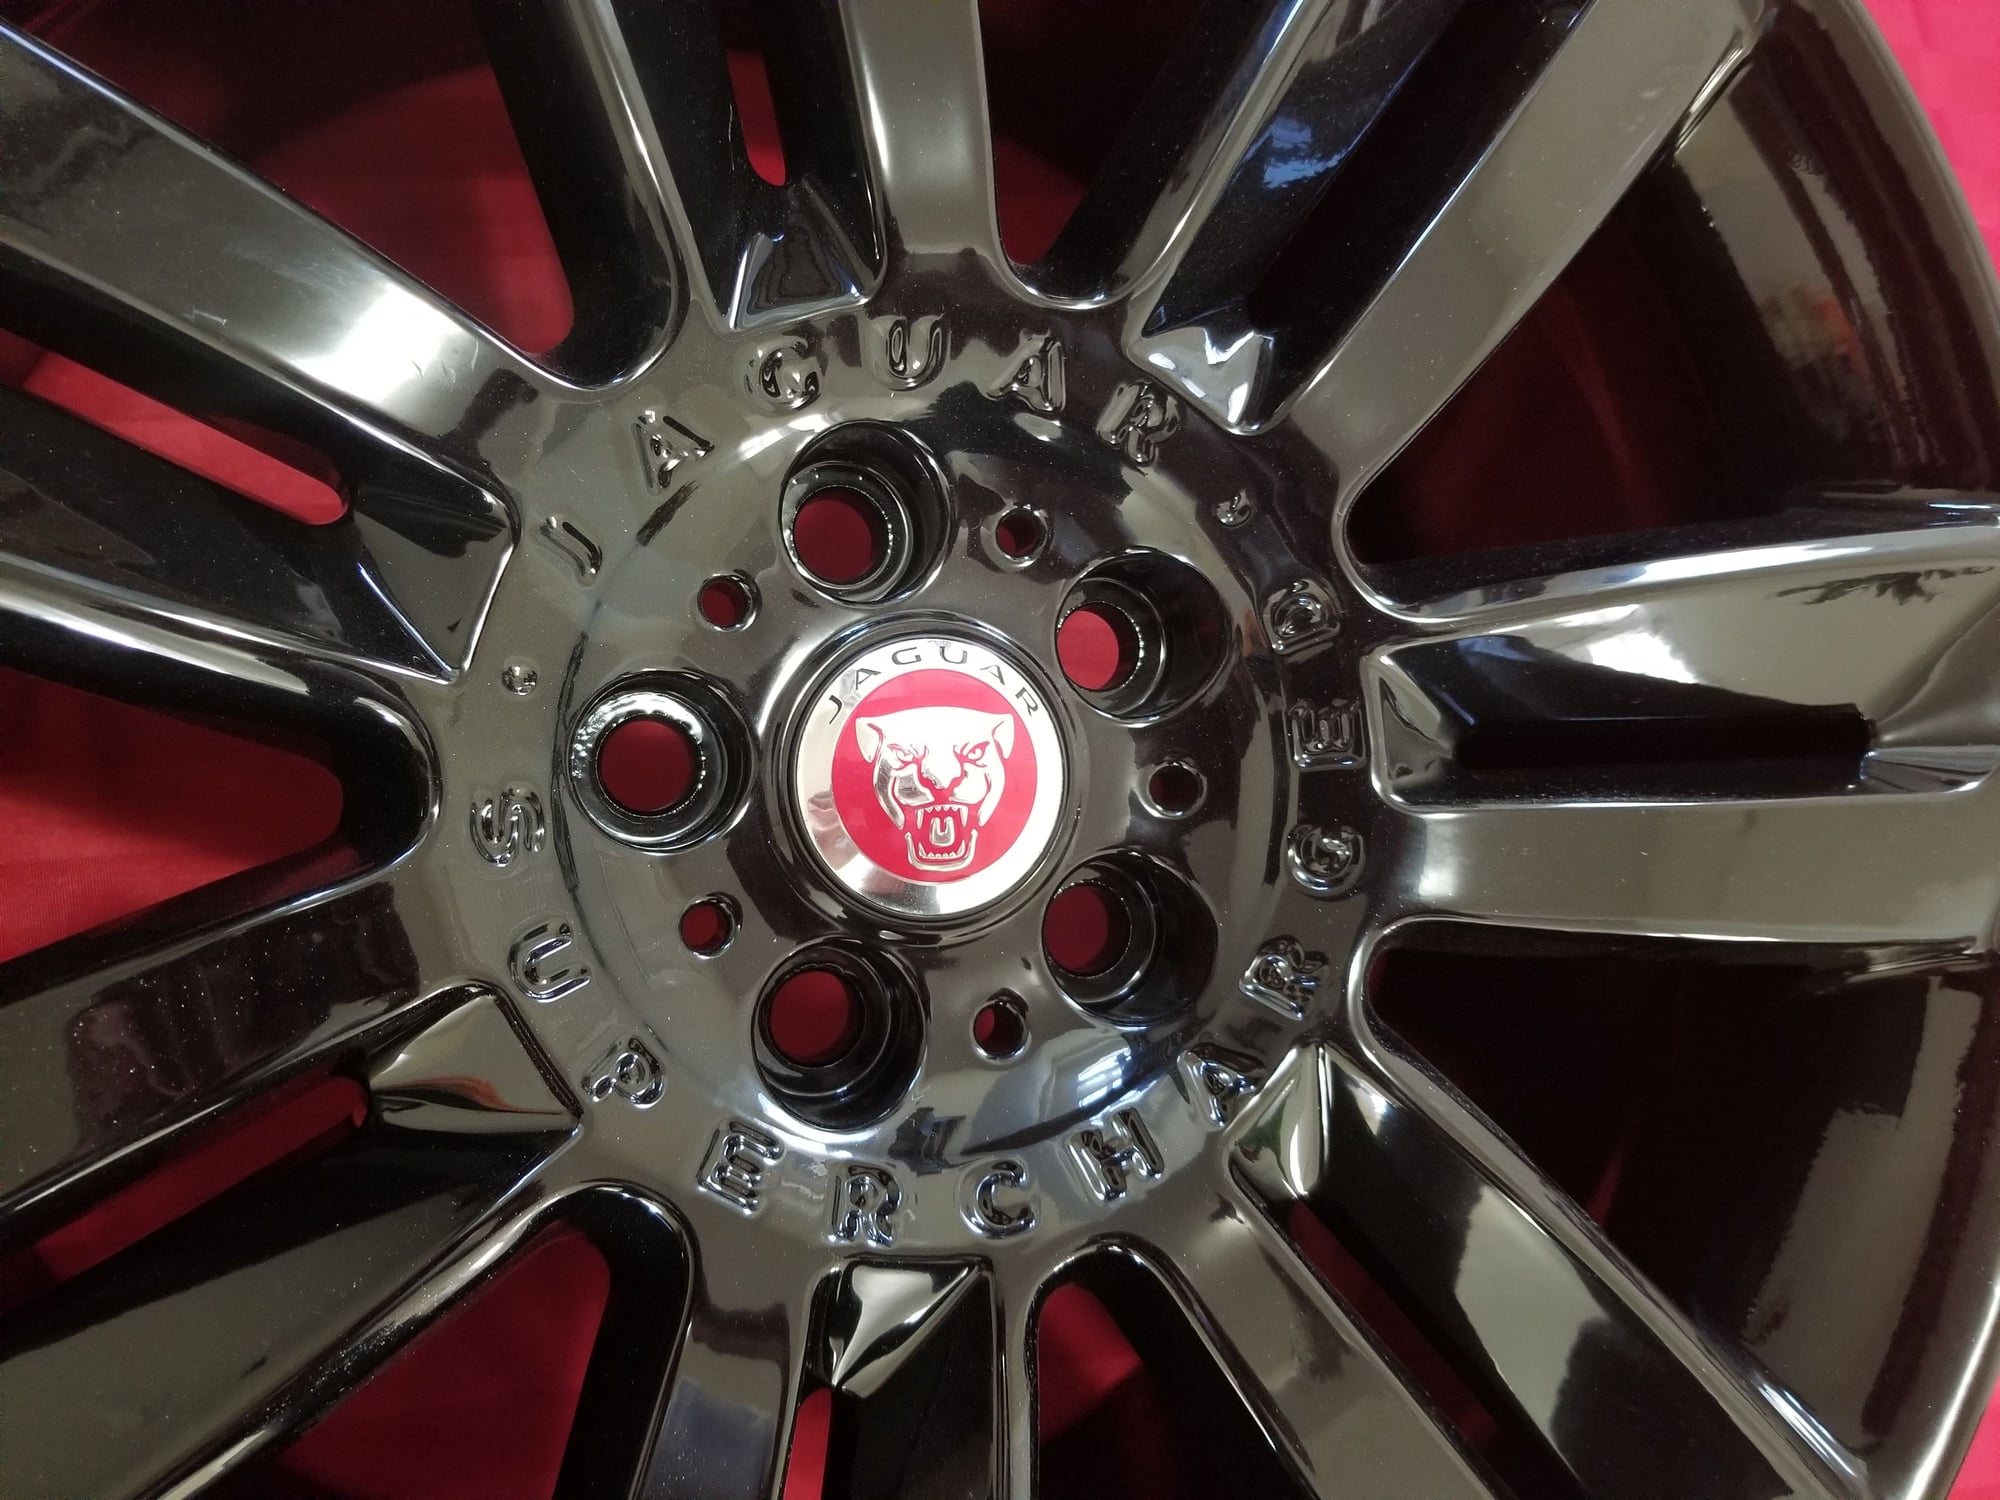 Wheels and Tires/Axles - Jaguar "Nevis" Wheels (TPMS) - New - All Years Jaguar All Models - Toronto, ON M4Y1R5, Canada